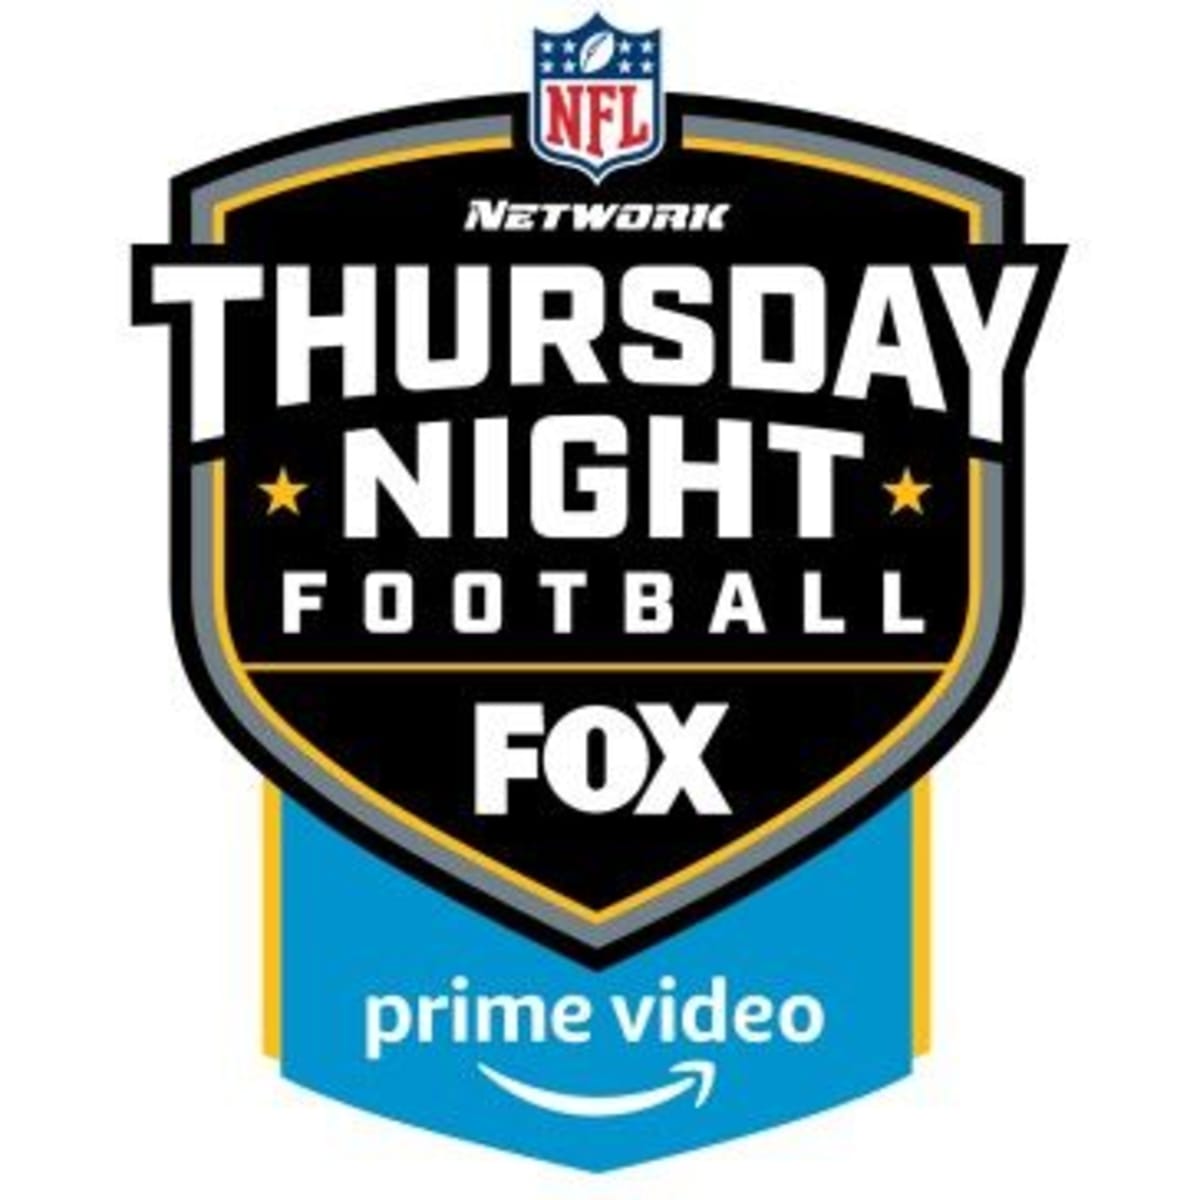 ok google what time is thursday night football